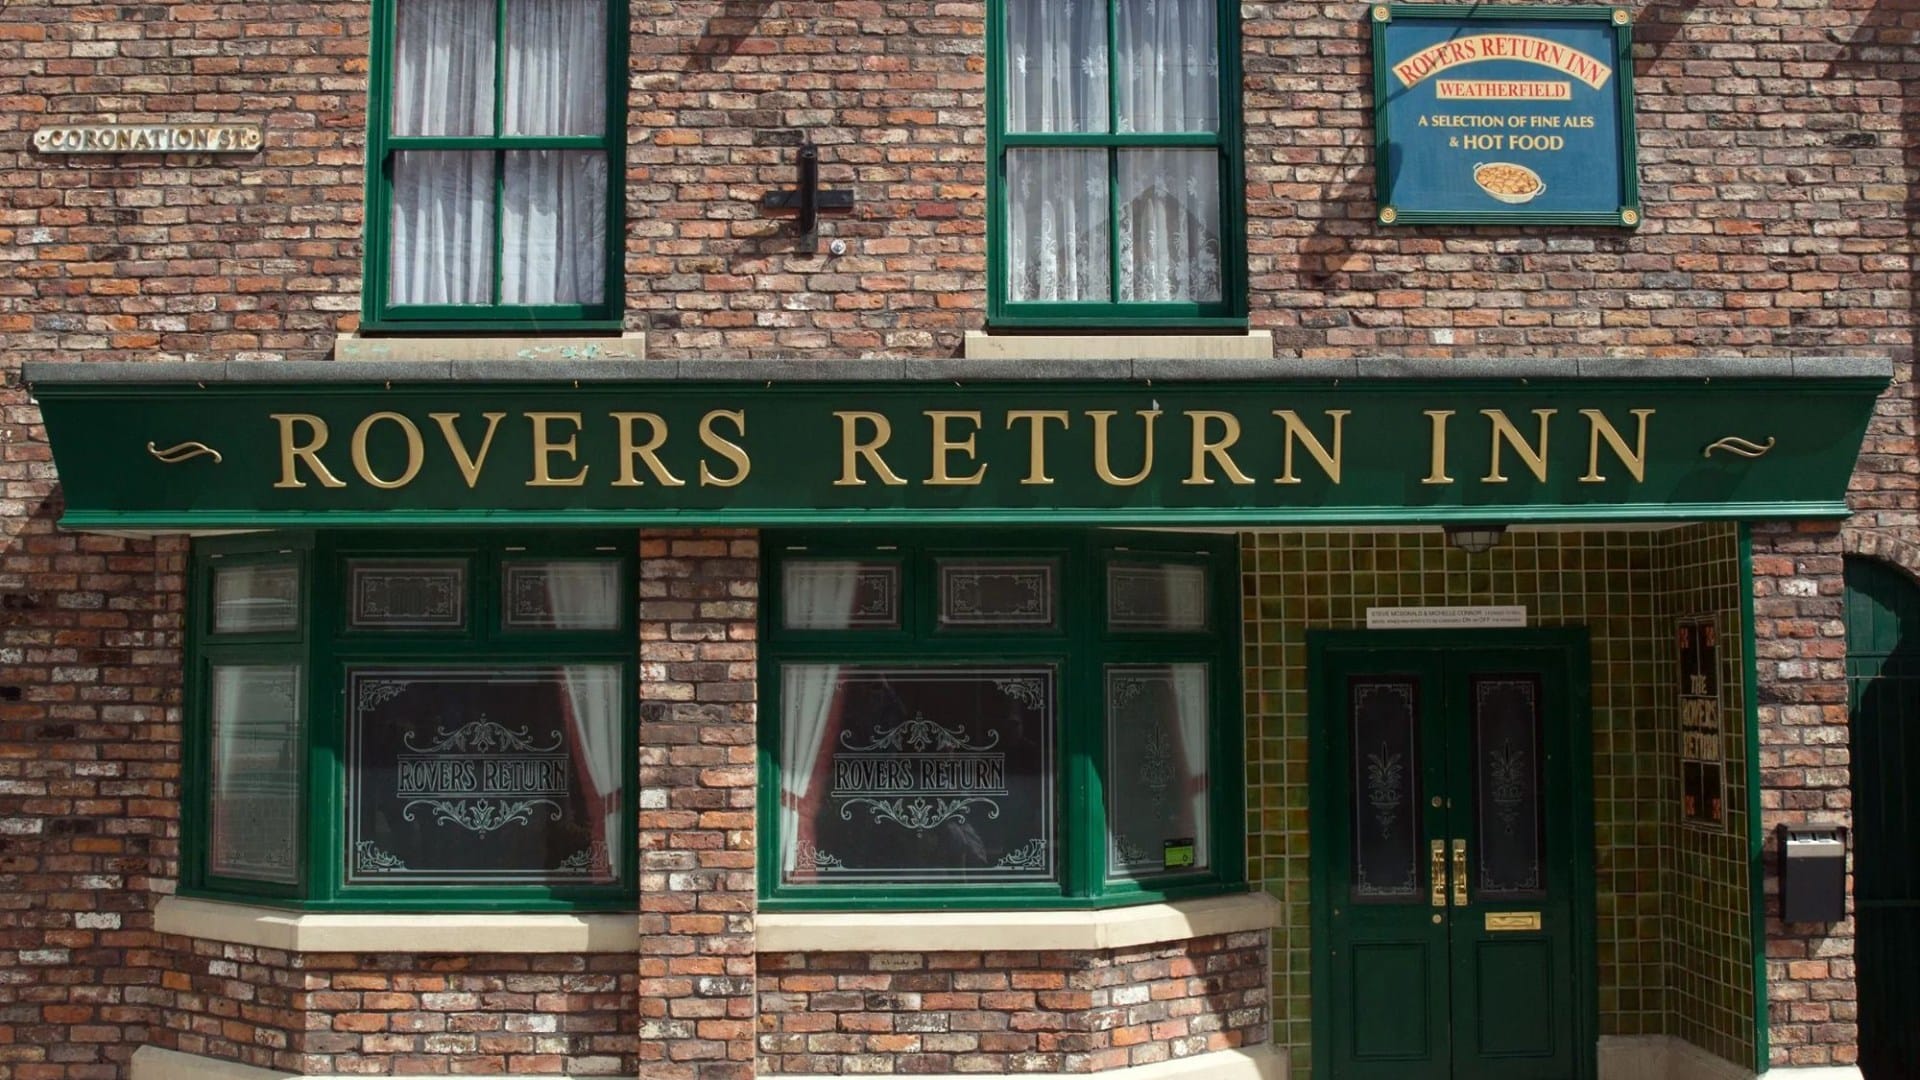 Coronation Street legend returns after 16 years and has already begun filming